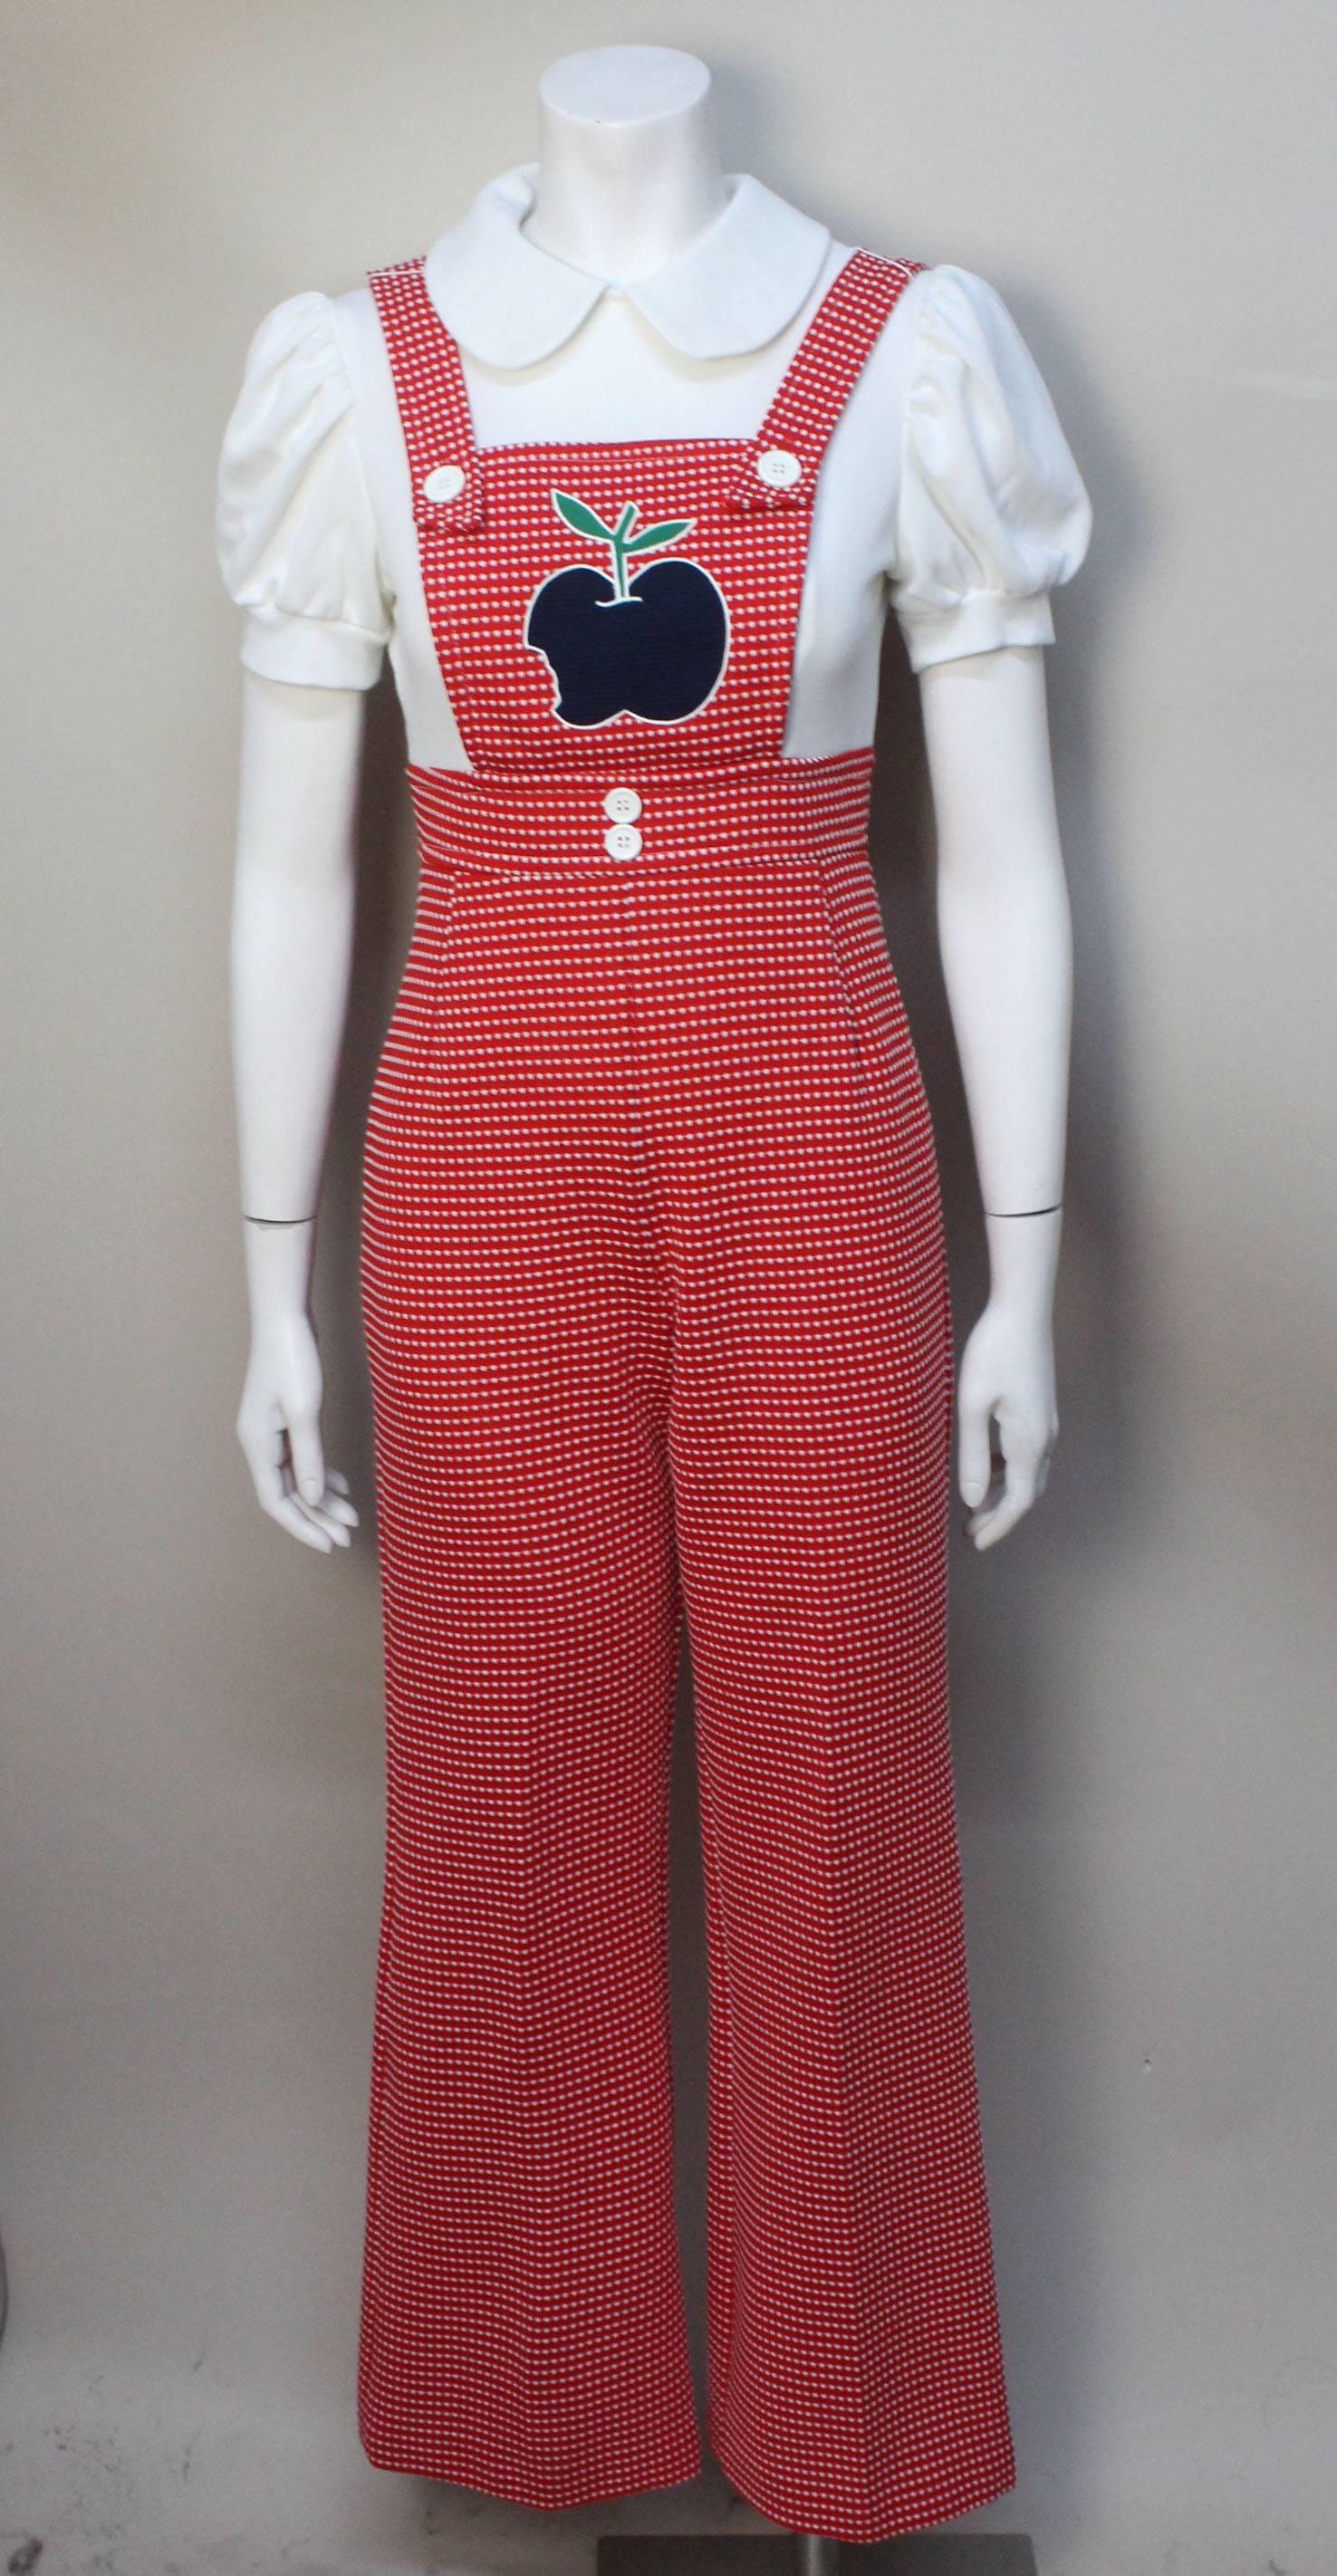 This jumpsuit is an authentic mod garment from the 1960's. The label reads "Styled by That Girl", manufactured in Miami, Indiana. The design of this garment was definitely inspired by Carnaby St fashion. At first glance, the jumpsuit